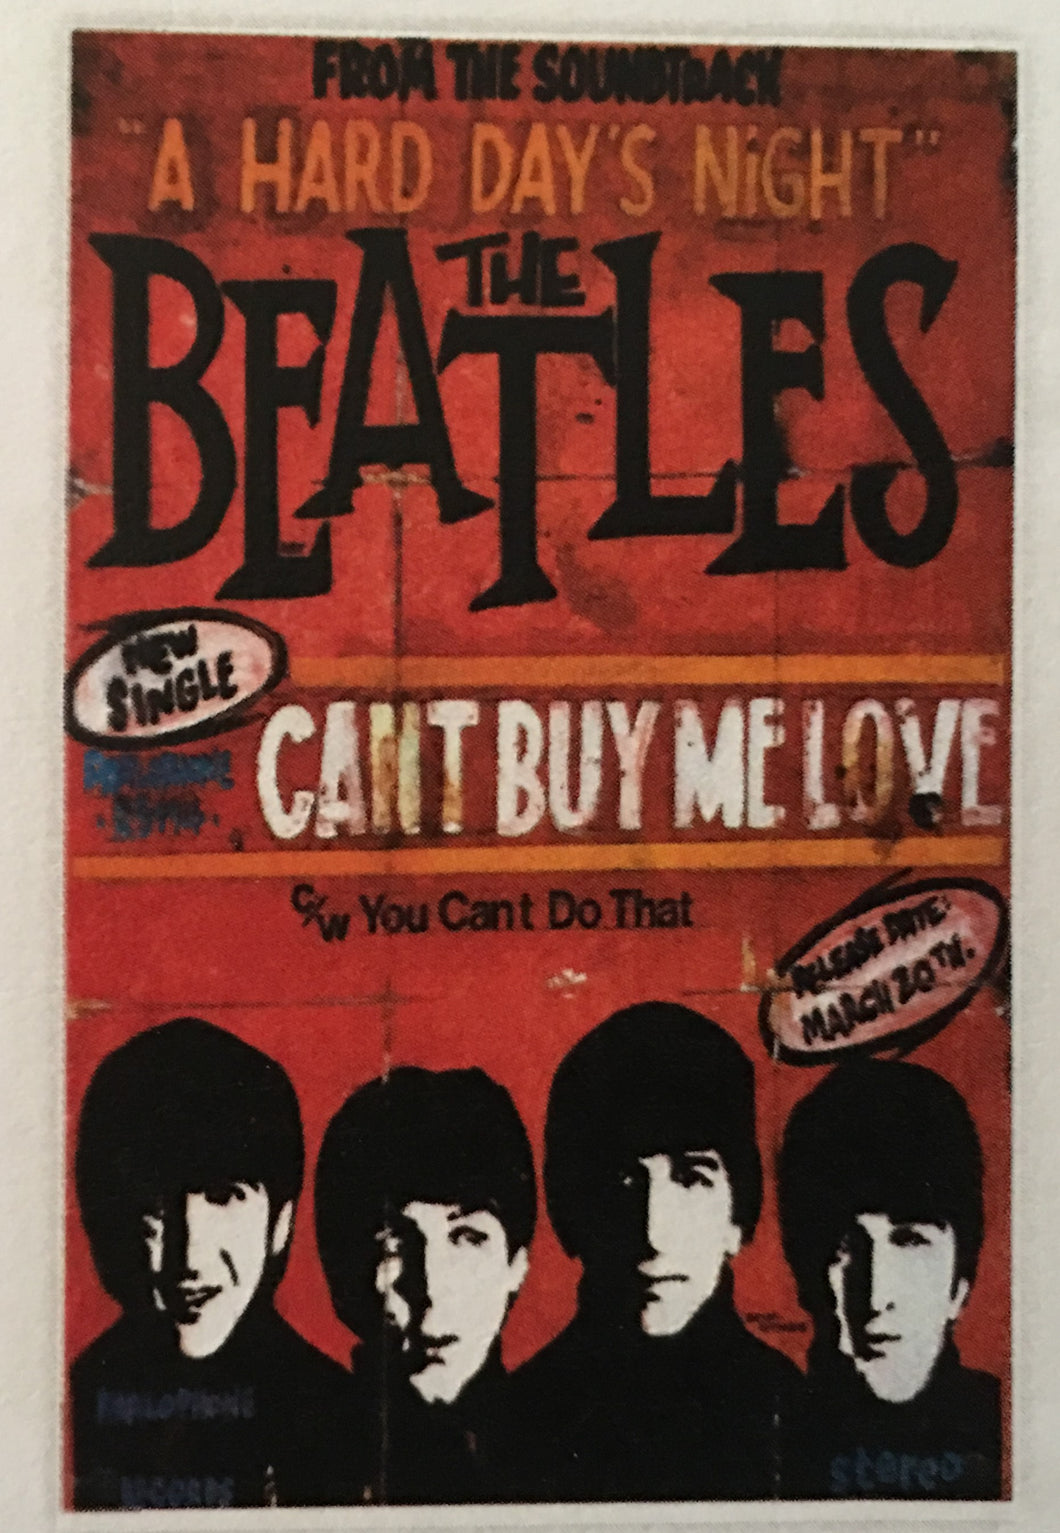 The Beatles Can't Buy Me Love Print